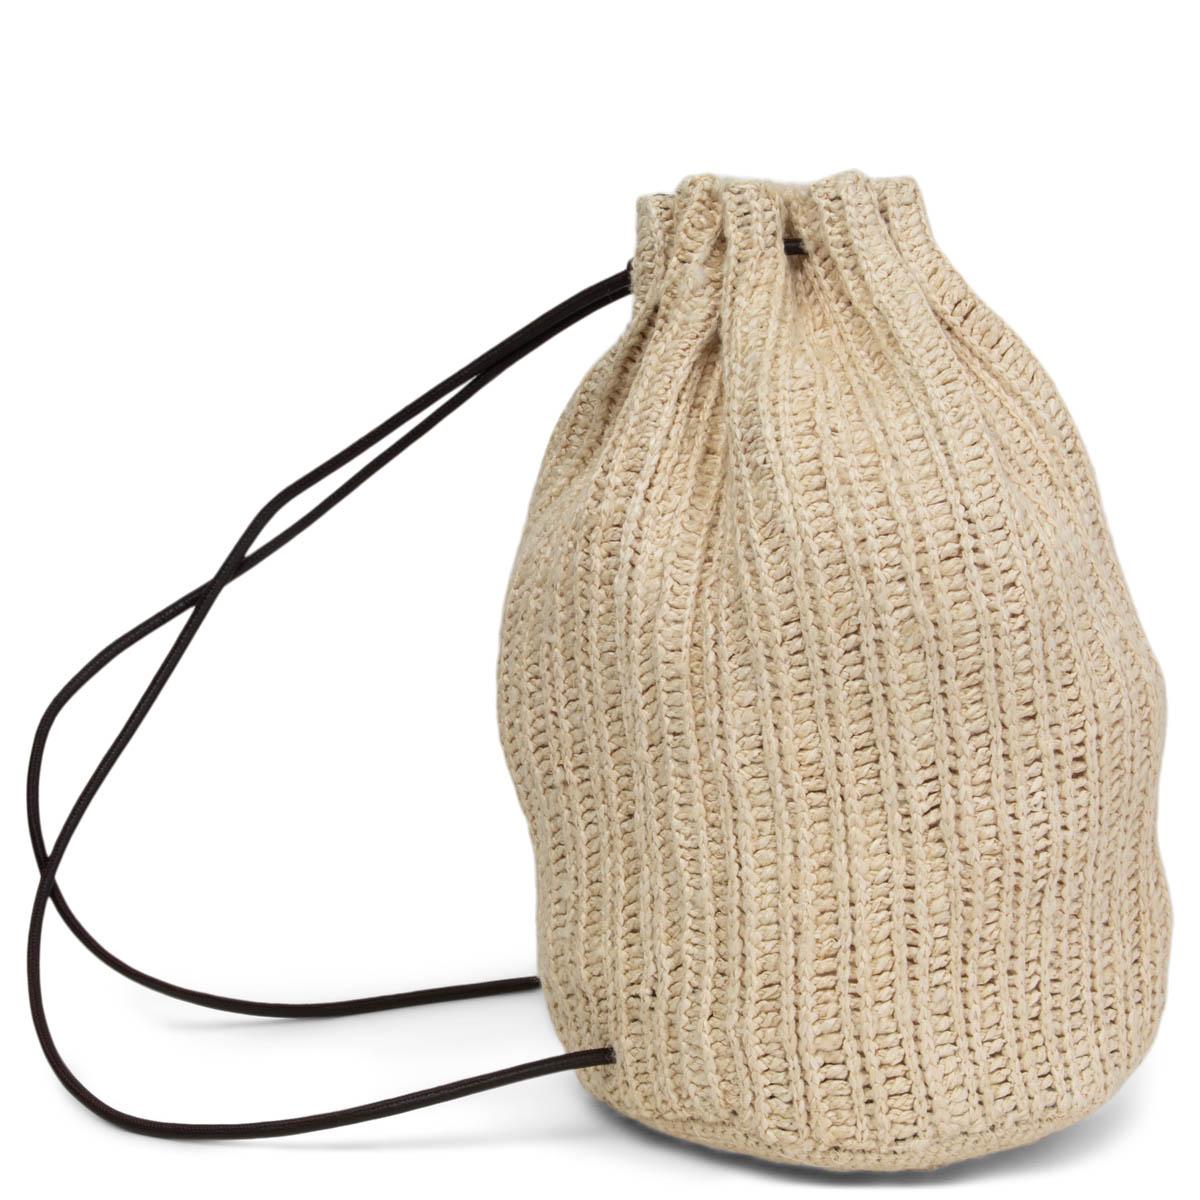 100% authentic The Row 'Massimo' backpack in off-white silk-blend raffia featuring espresso brown leather trimming. Bucket silhouette with drawstring leather straps closure. Unlined. Has been carried and is in excellent condition.